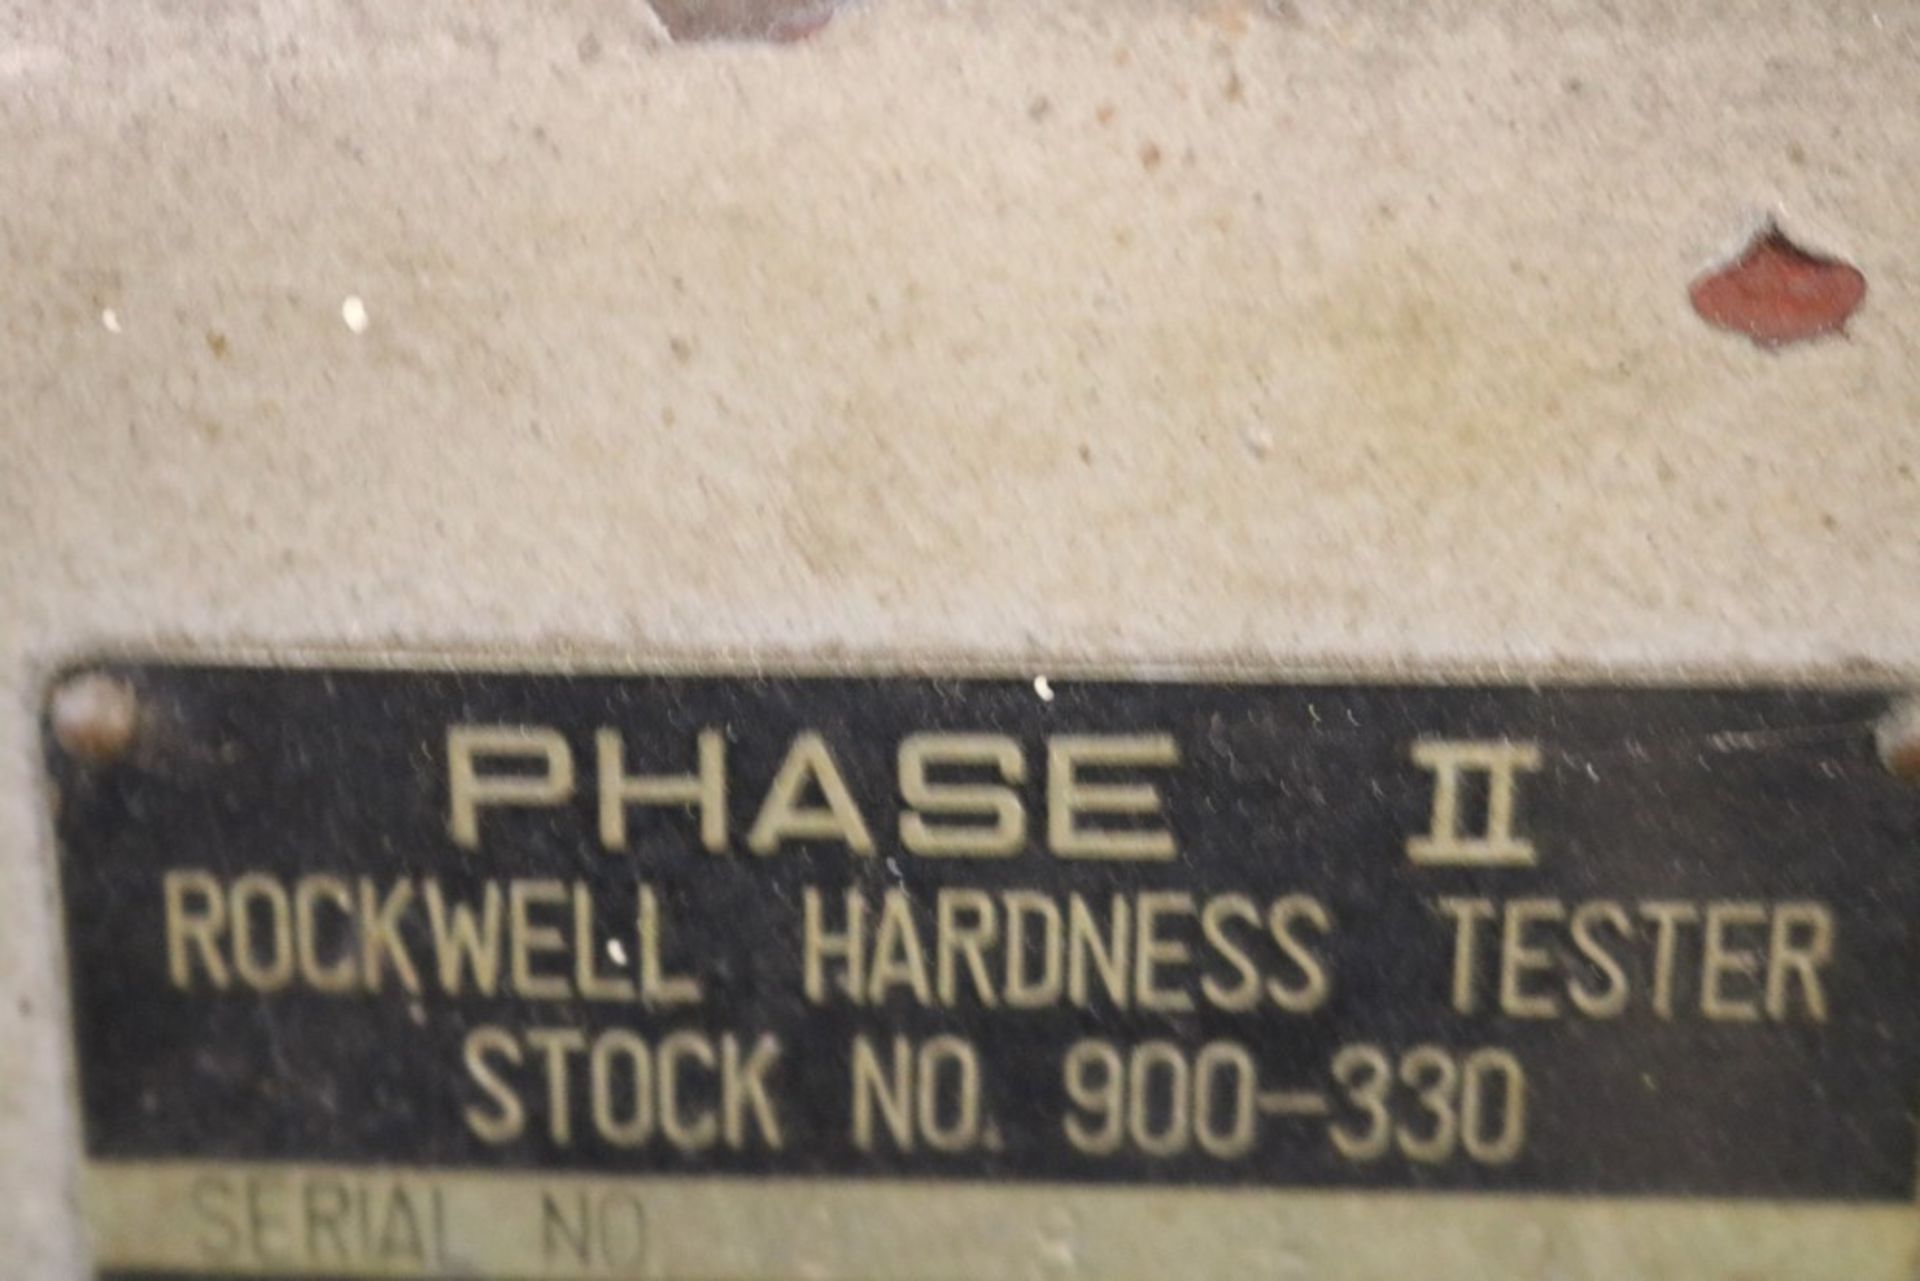 1994 Phase II Rockwell Hardness Tester Stock # 900-330 with Accessories on Metal Stand - Image 6 of 6